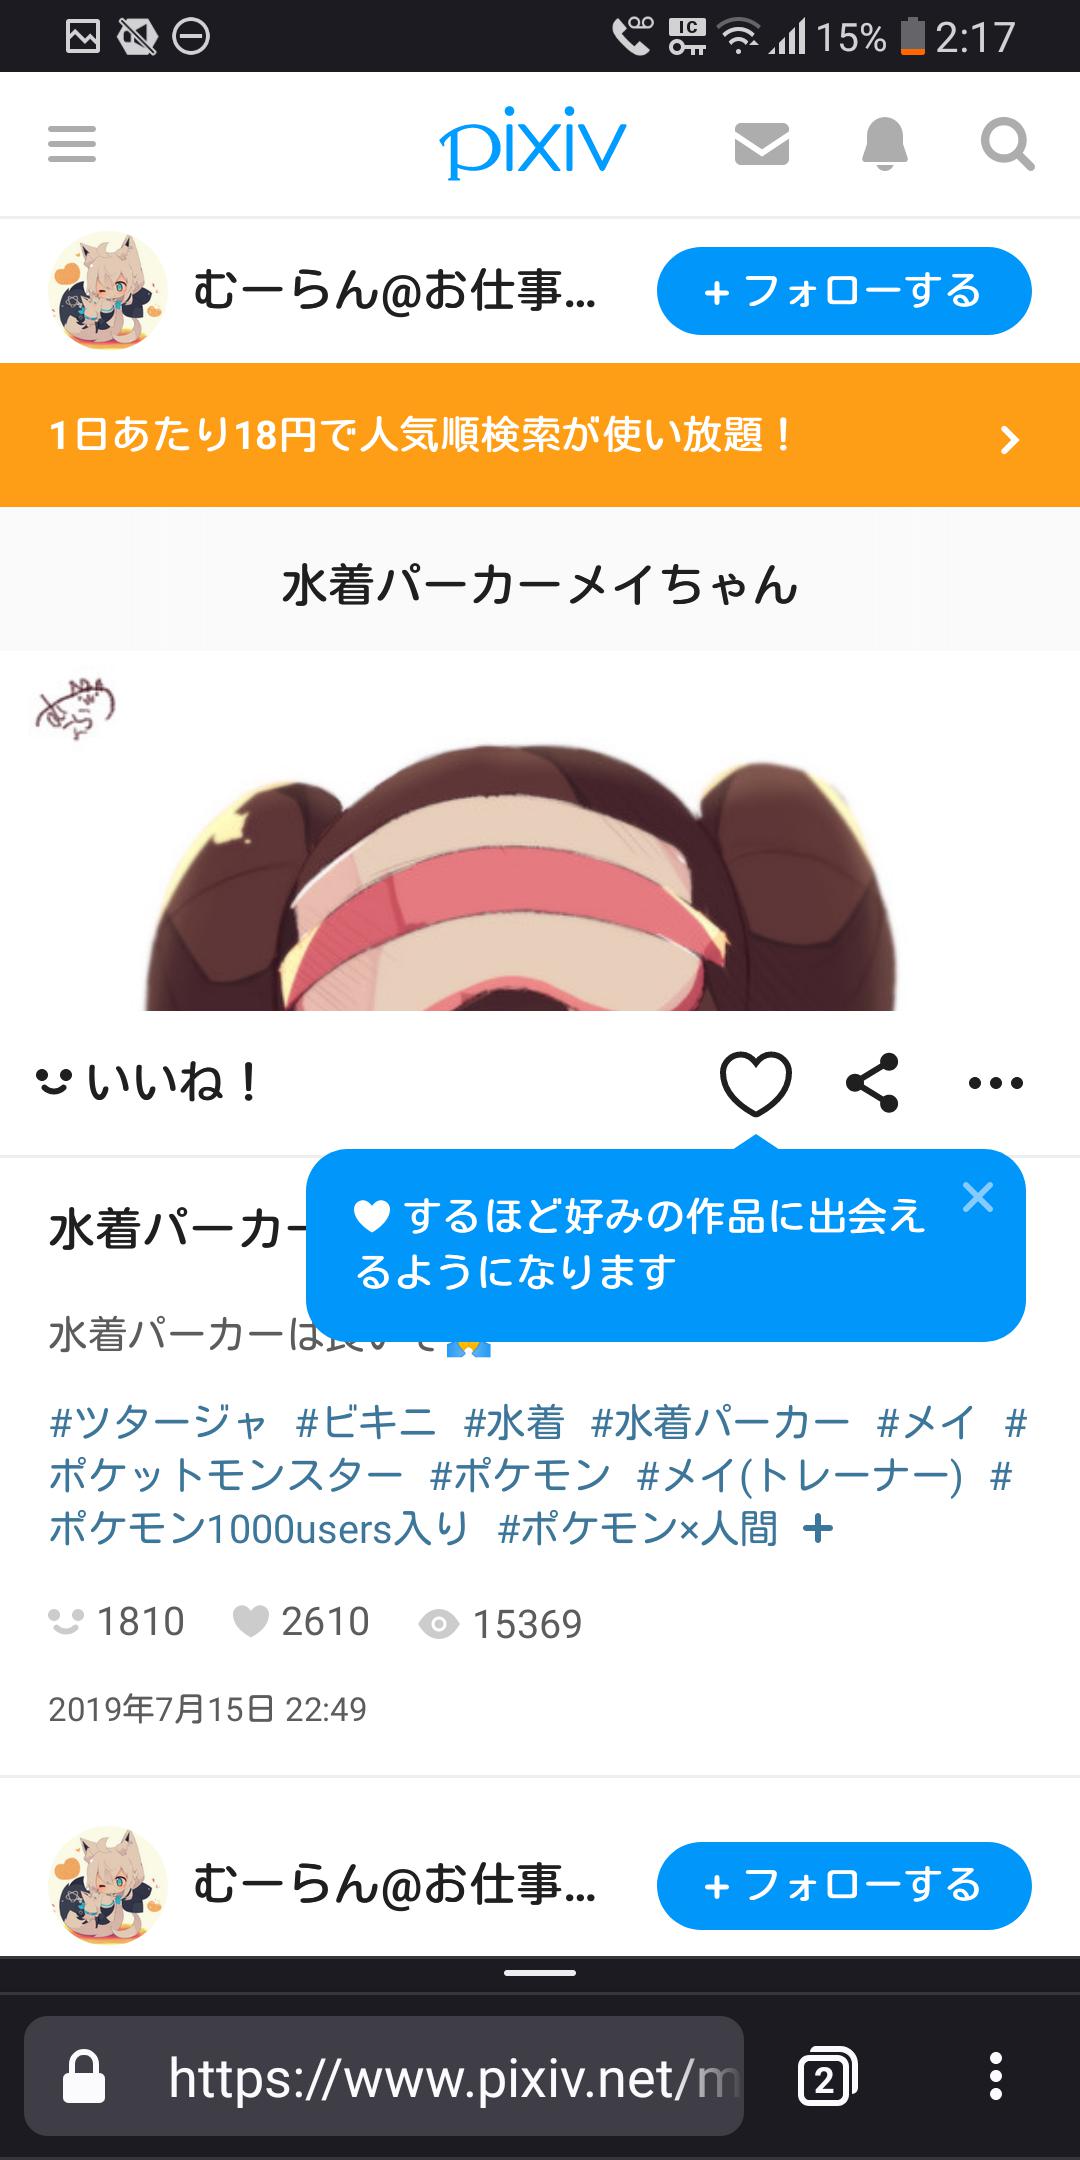 Www Pixiv Net Image Is Overlapped After Opening An Illustration In A New Tab Web Bugs